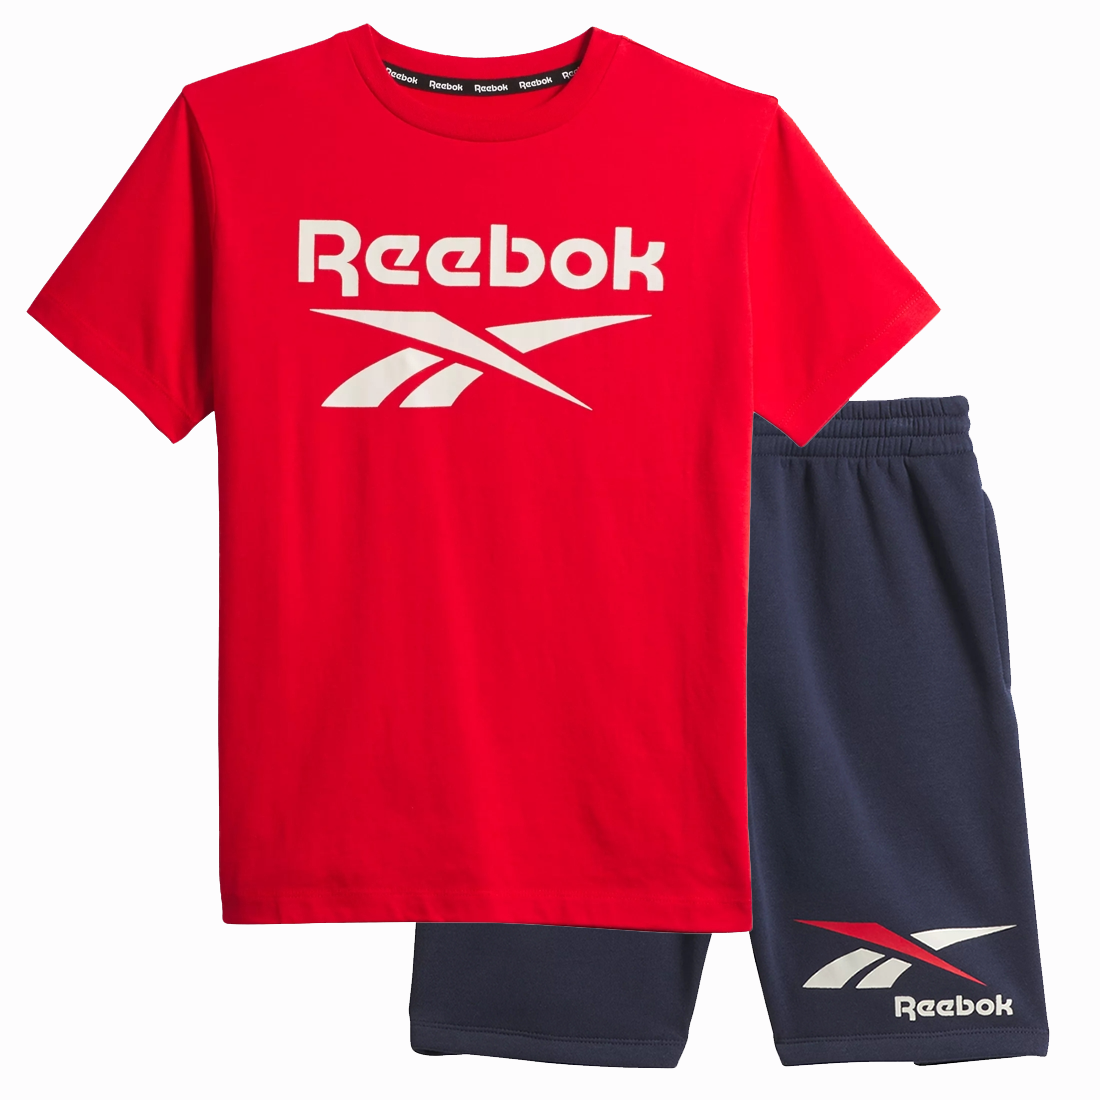 Red Reebok t-shirt and navy blue shorts with the brand's logo.